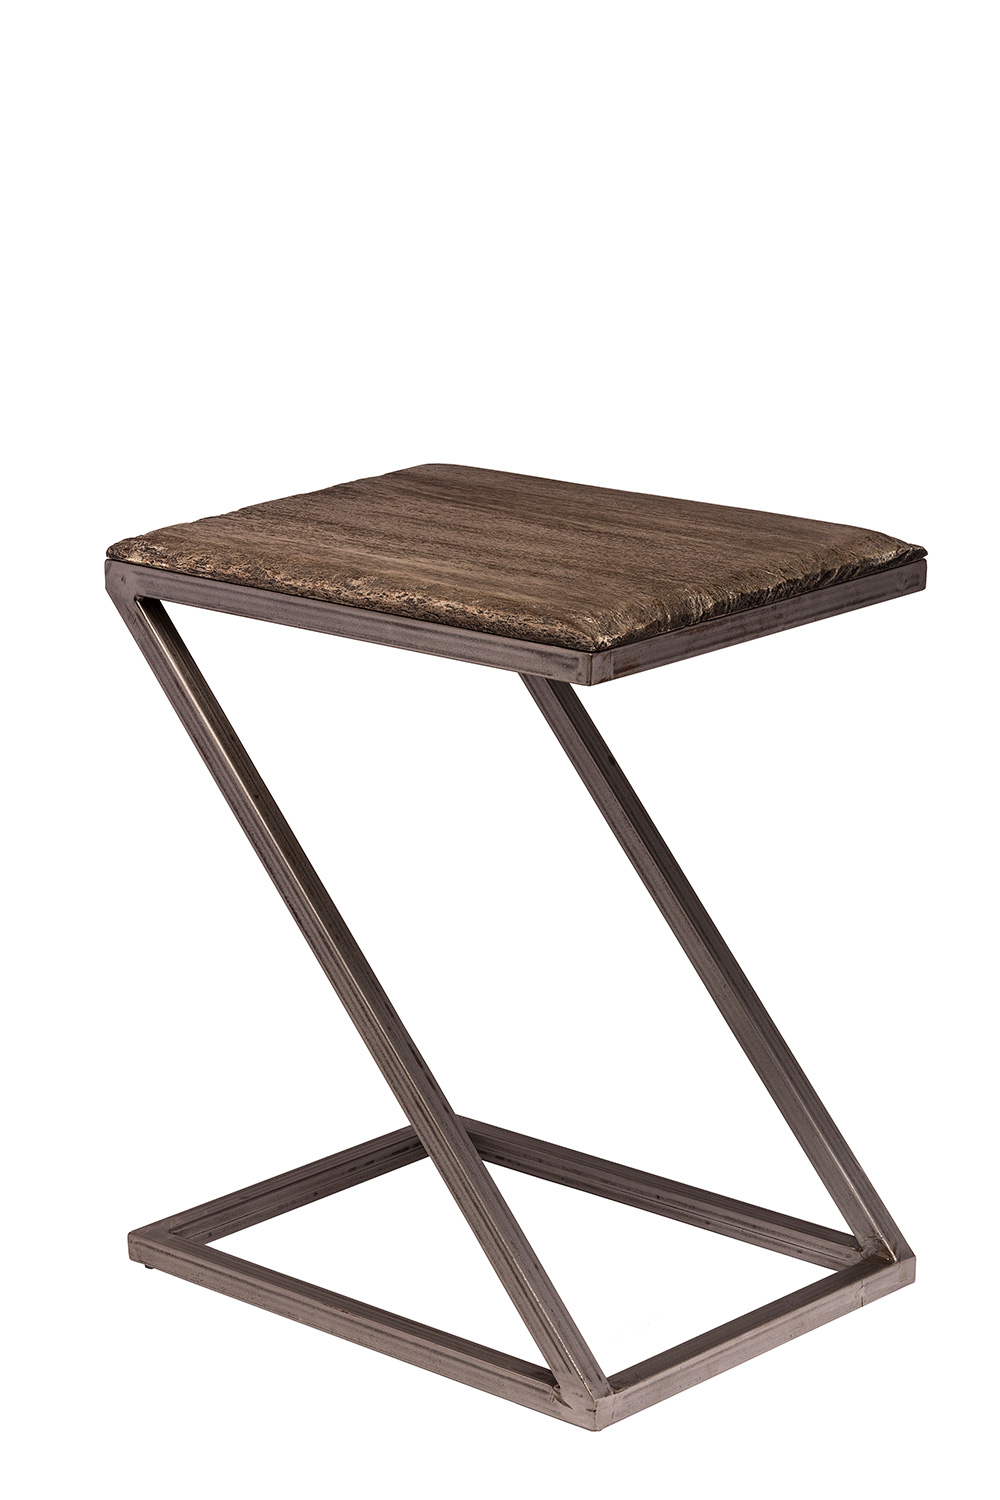 Hillsdale Lorient Z-Shape Accent Table - Washed Charcoal Gray/Aged Steel Metal